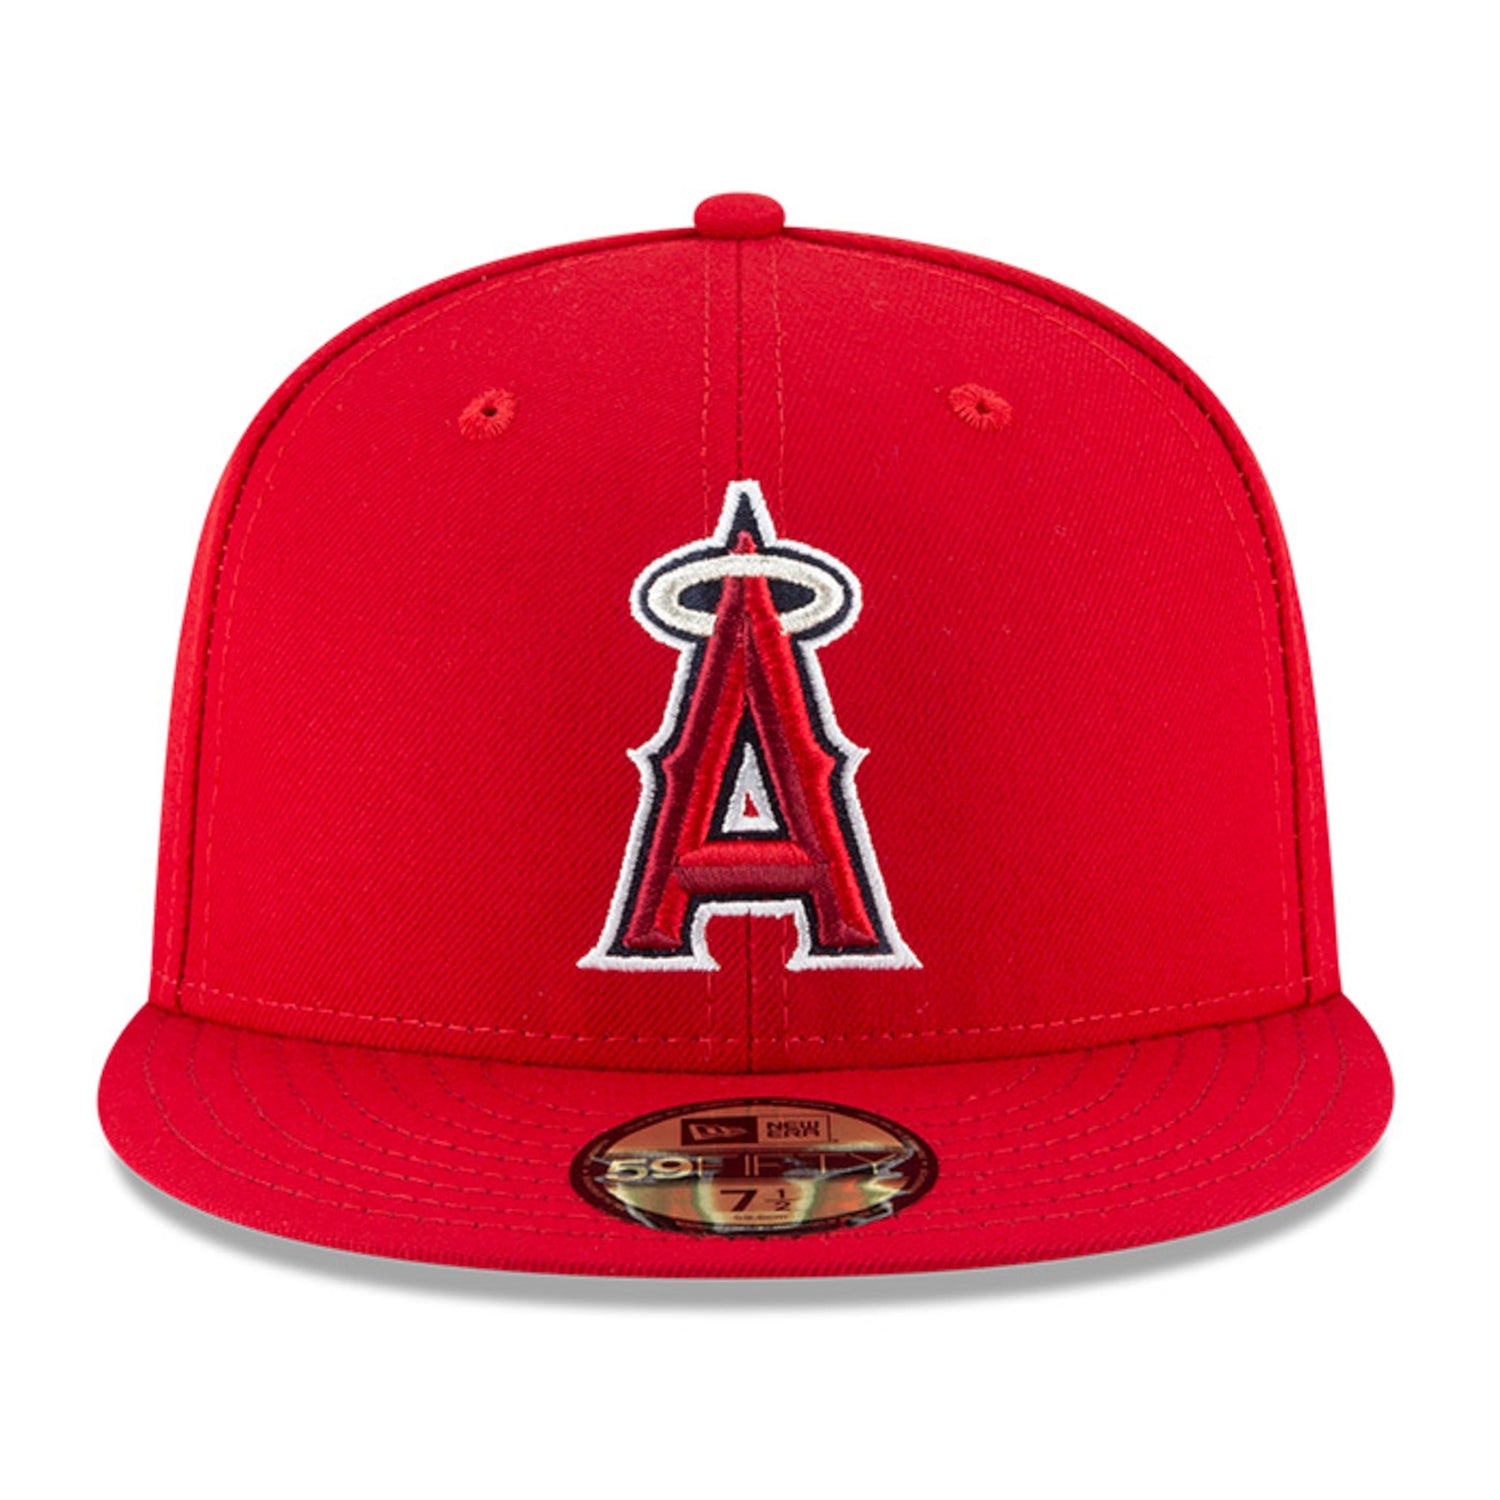 New Era 59Fifty Authentic Collection Los Angeles Angels Game Hat